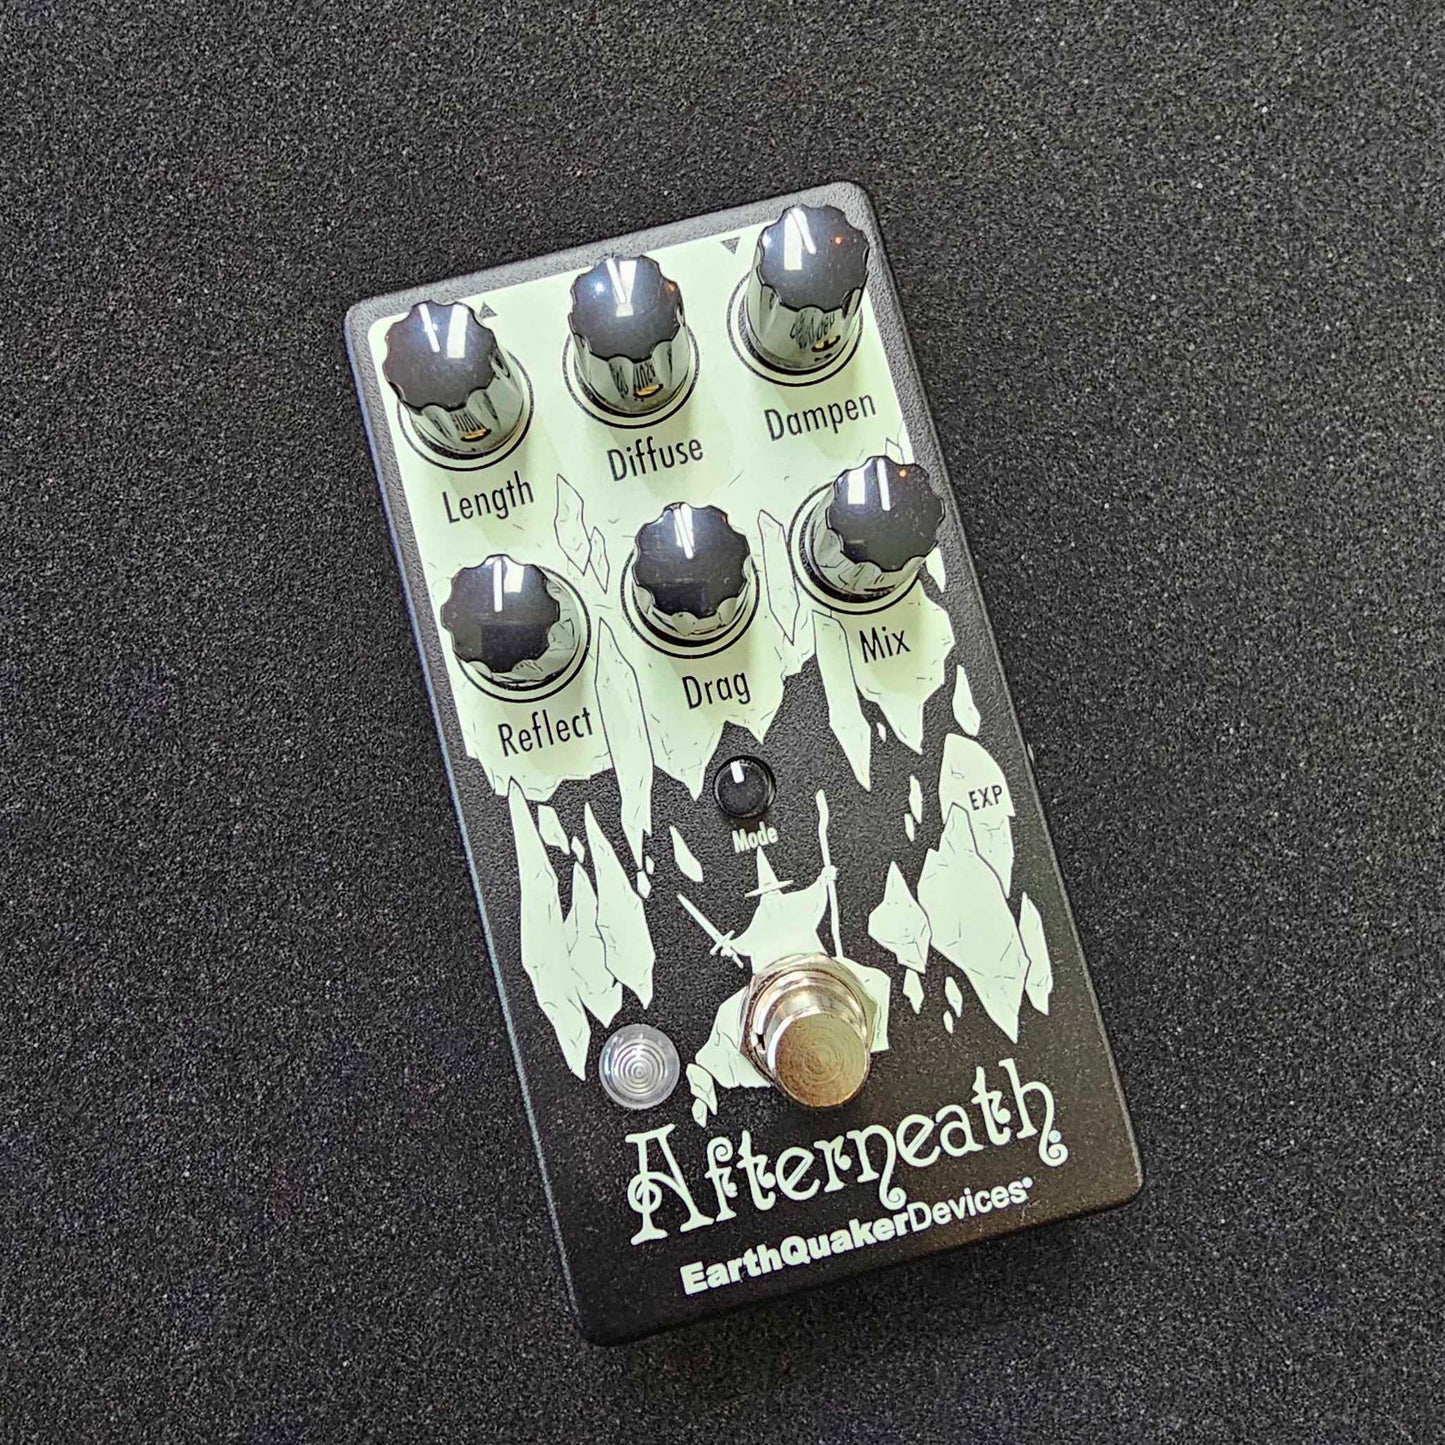 Earthquaker Devices Afterneath V3 Reverb Pedal